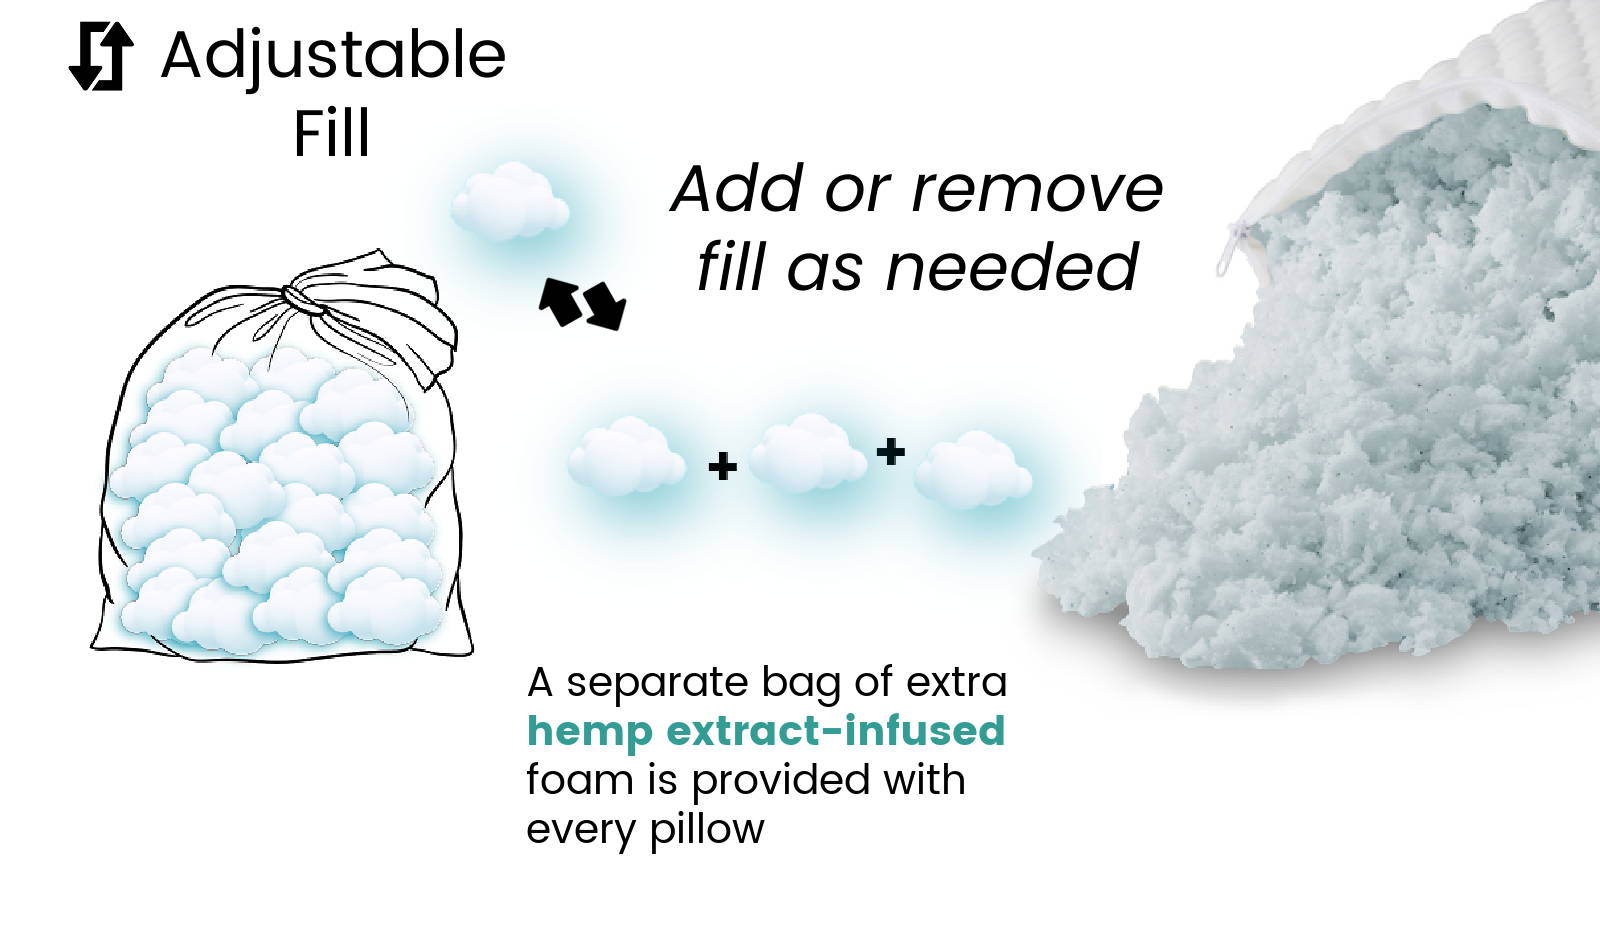 An open pillow with the adjustable fill CBD gel memory foam spilling out and an extra bag of foam so you can add or remove fill as needed for the best comfort. A separate bag of fill comes with your pillow.